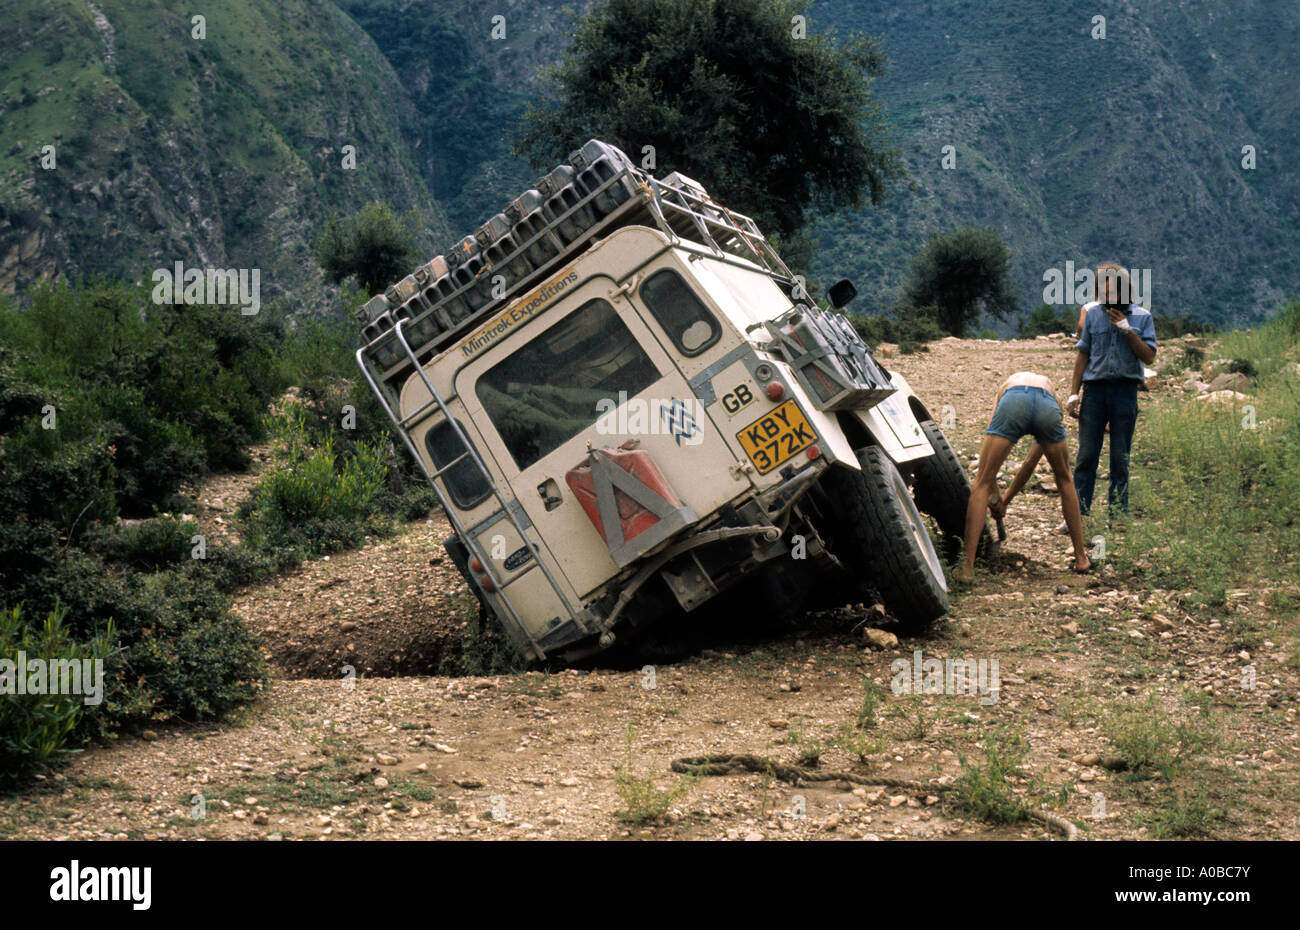 0533 02 Land Rover Series IIA one ton model in ditch Swat Valley Northwest  Pakistan Asia Indian Subcontinent Stock Photo - Alamy